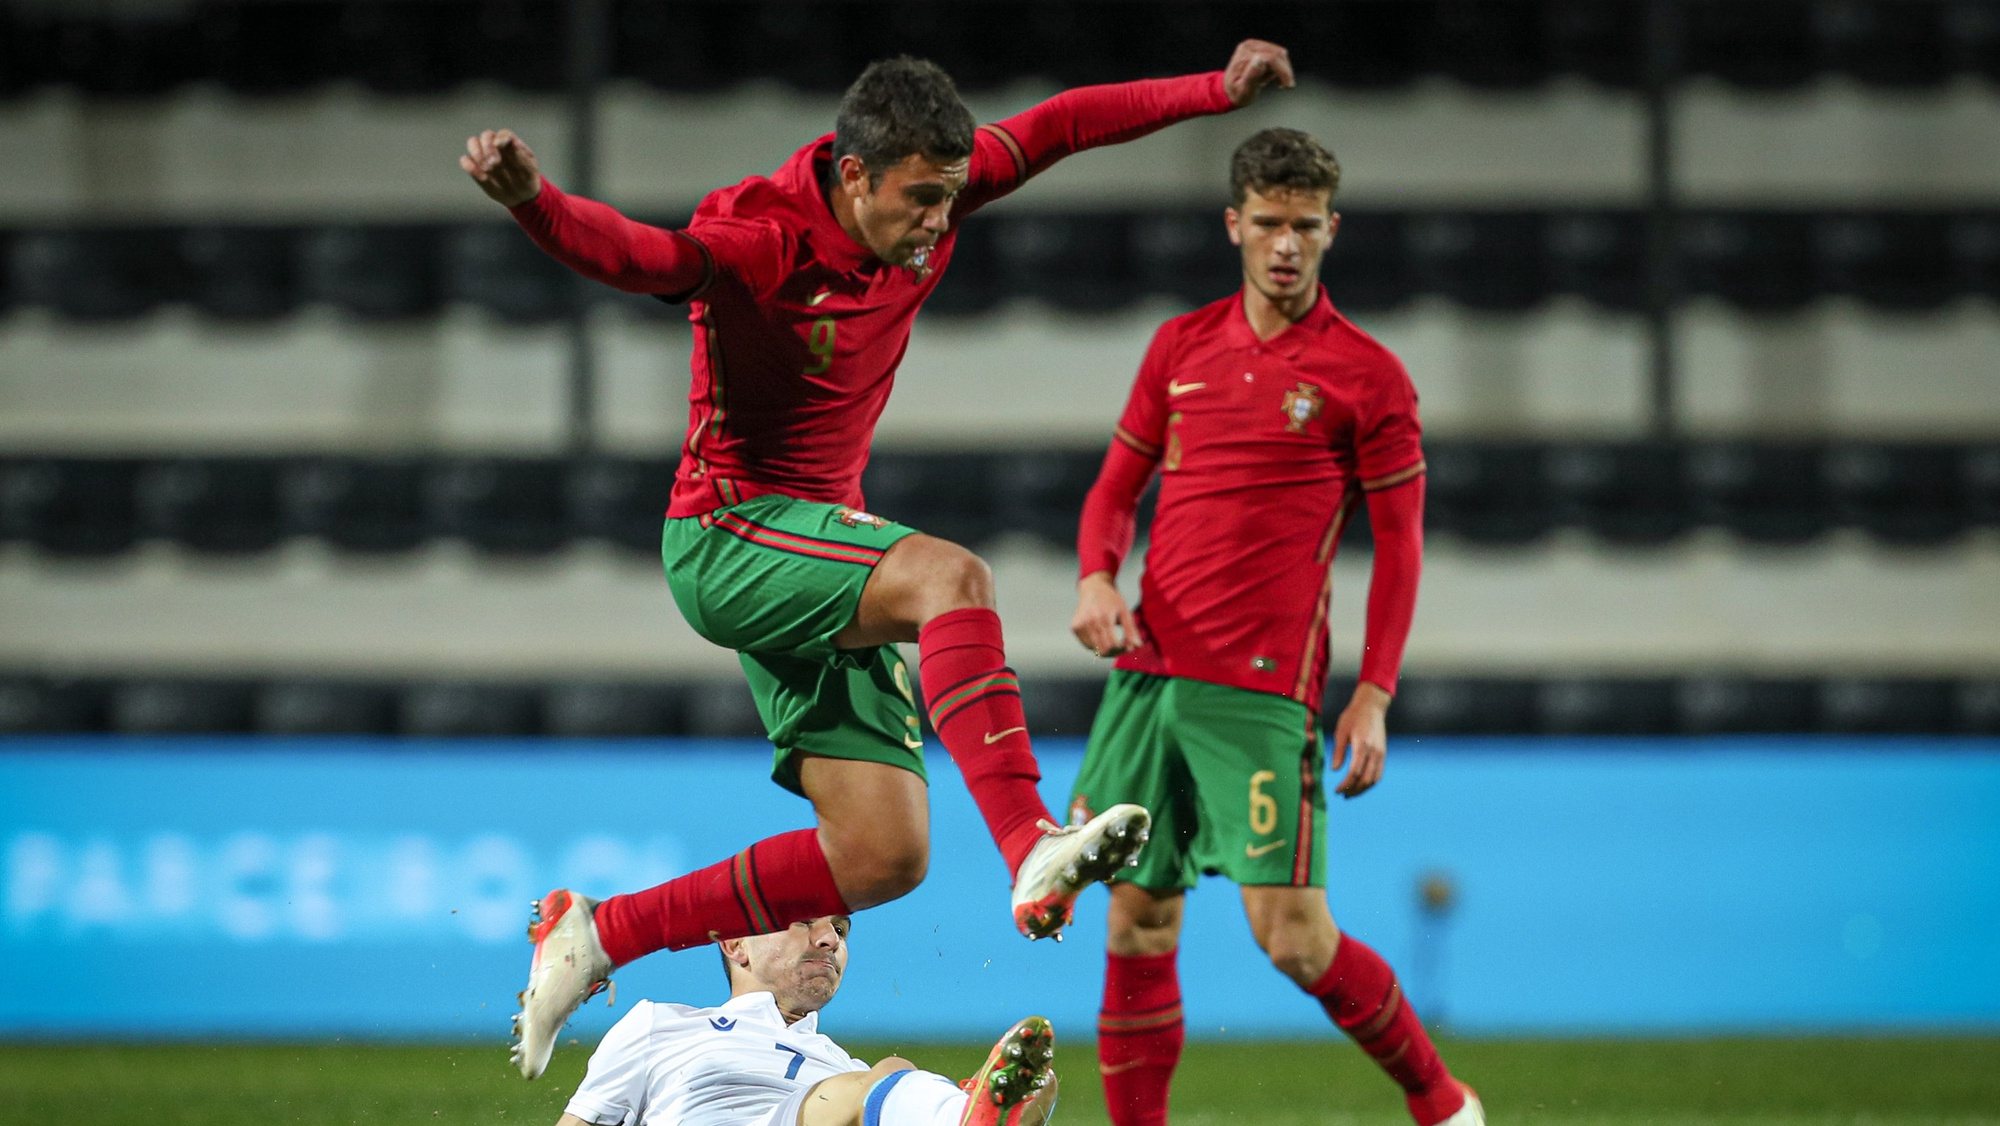 Portuguese national team player, Henrique Araujo (C), disputes the ball with the Cyprus national team player, Costi (L), in the qualifying match for the 2023 Under-21 European Soccer Championship (Euro2023), Faro, Portugal, November 16, 2021. LUÍS FORRA/LUSA